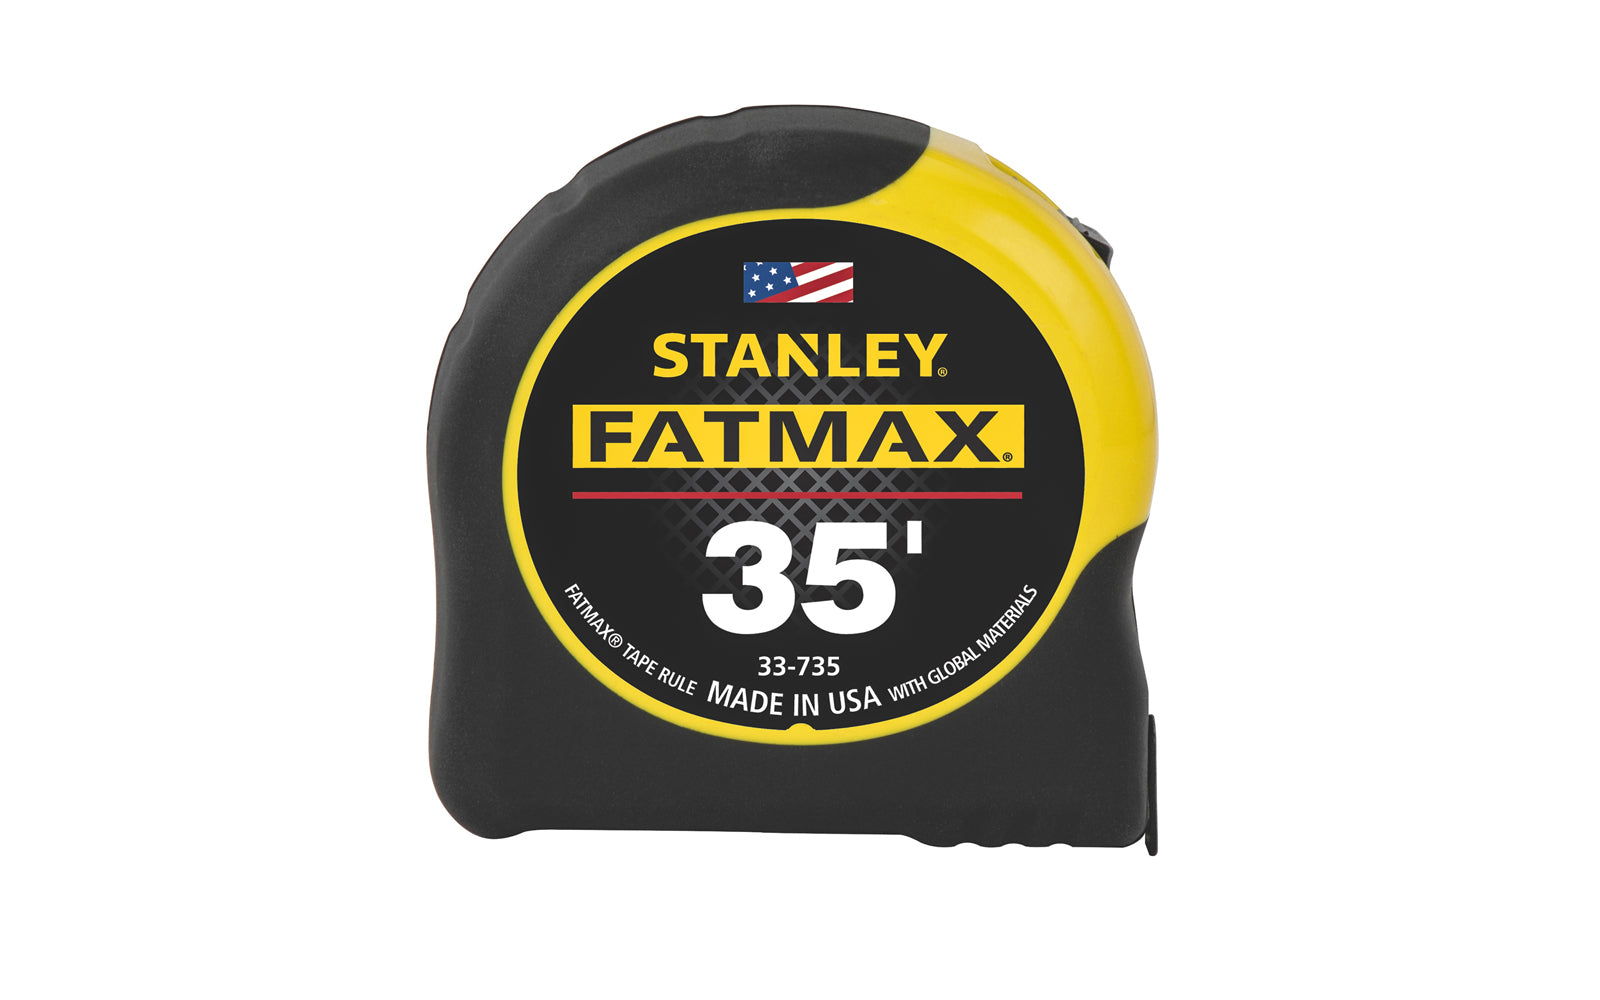 Stanley Fatmax 35' Tape Measure ~ 33-735 - Made in USA